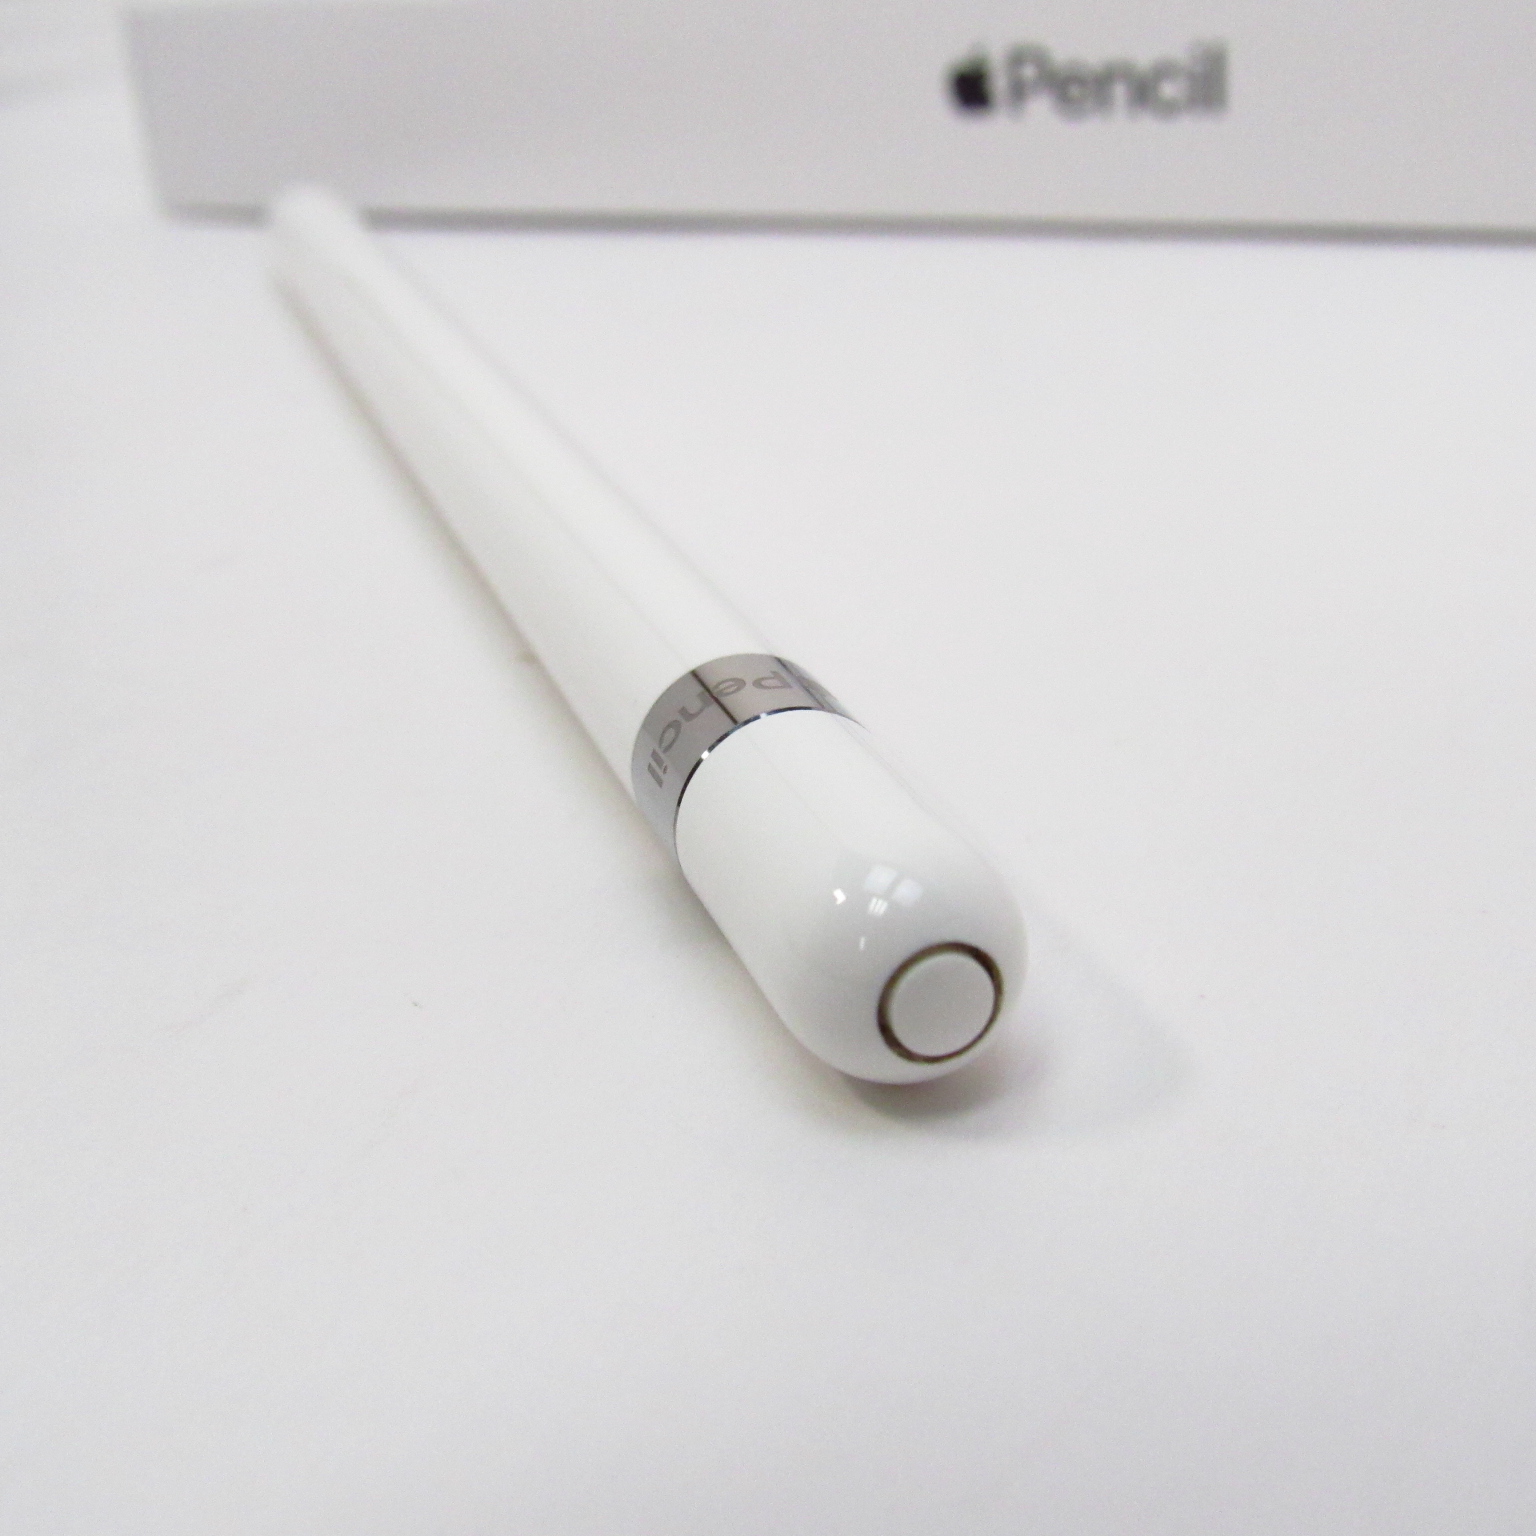 Apple Pencil 1st Generation - stylus for tablet - MQLY3AM/A - Tablet Stylus  